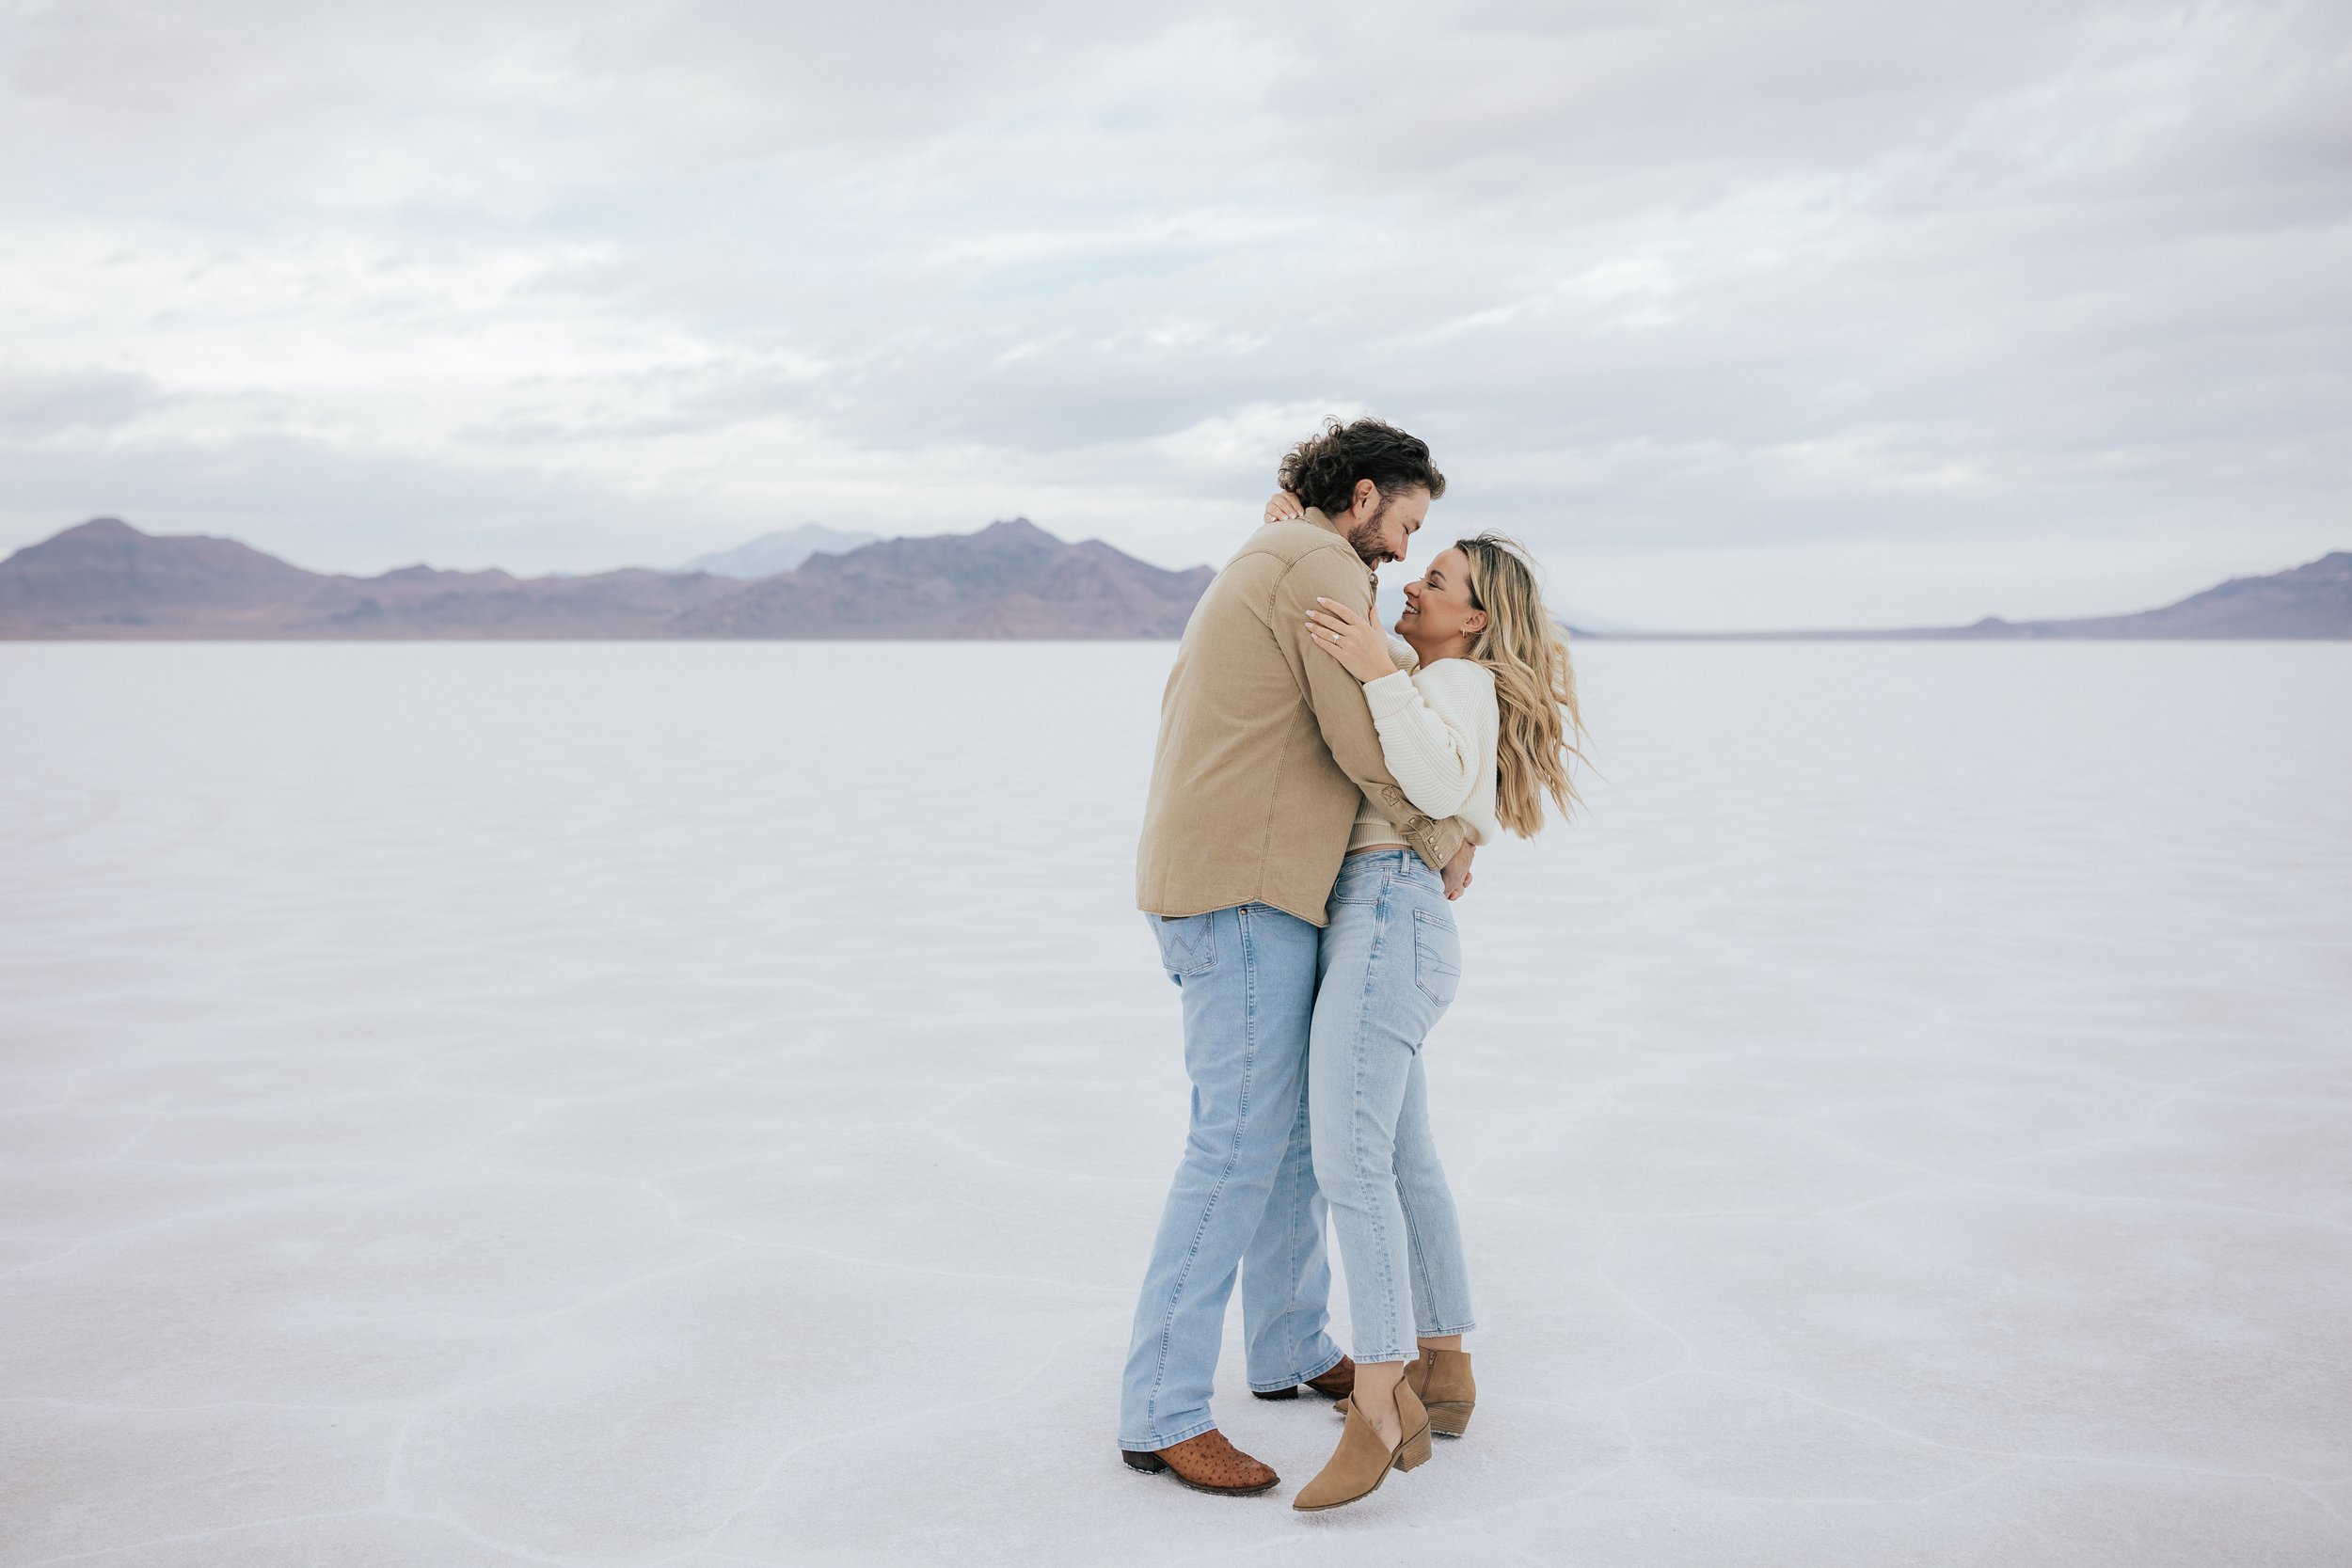  Engaged couple dance and kiss and laugh together at the Bonneville Salt Flats near Wendover, Nevada and Salt Lake City, Utah. Cowboy and his girl walk together with his arm around her shoulder. The Salt Flats are white and the sky is overcast. The m